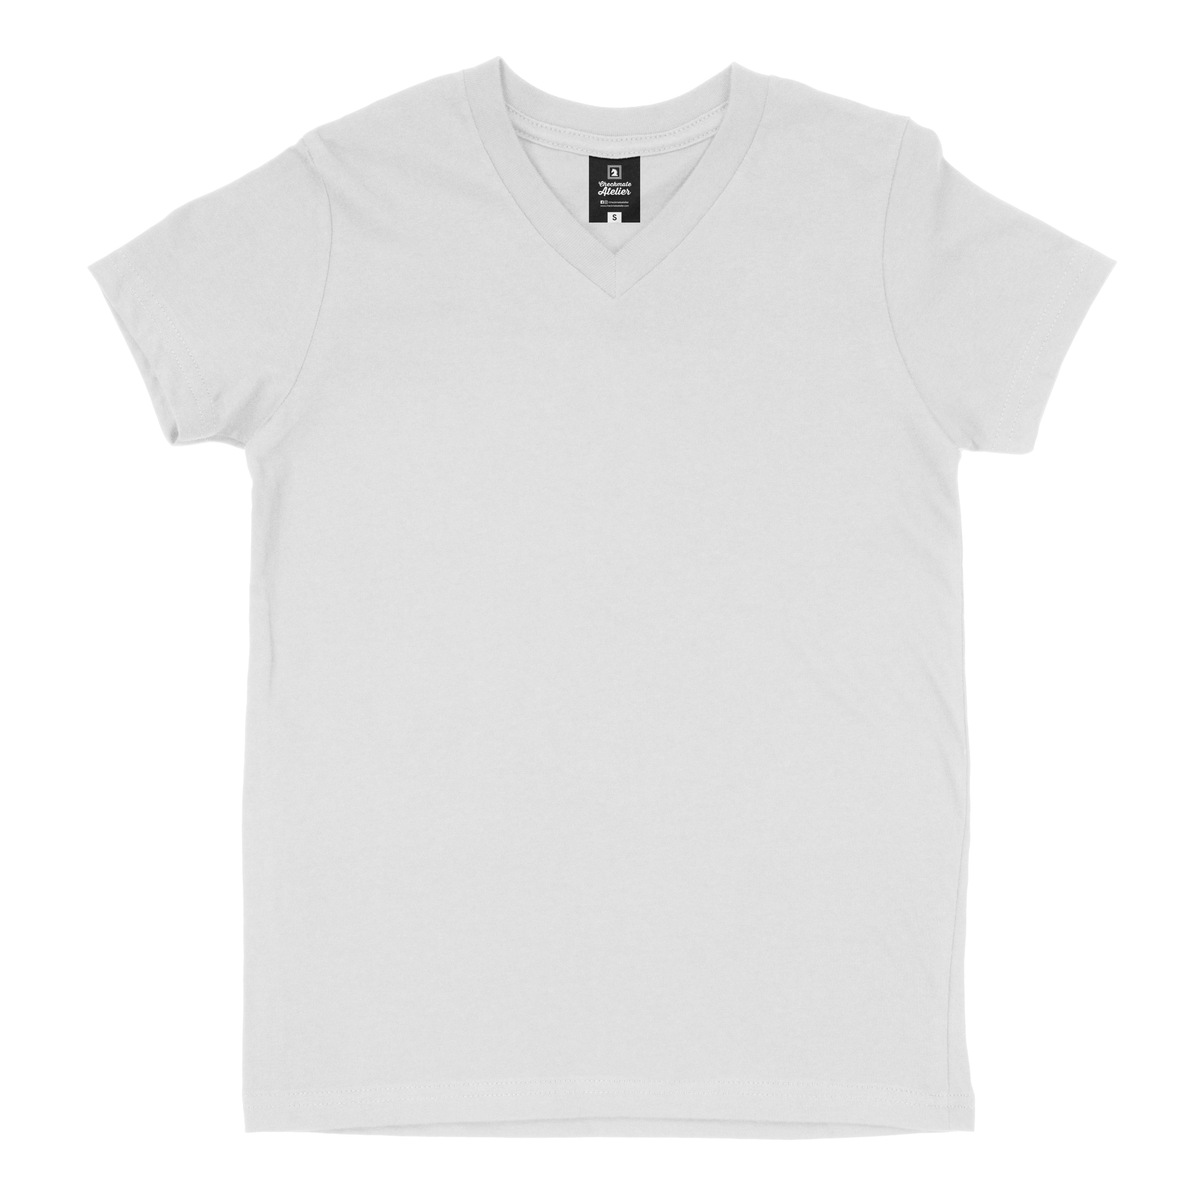 White V-Neck T-Shirt - Shop Now - Checkmate Atelier